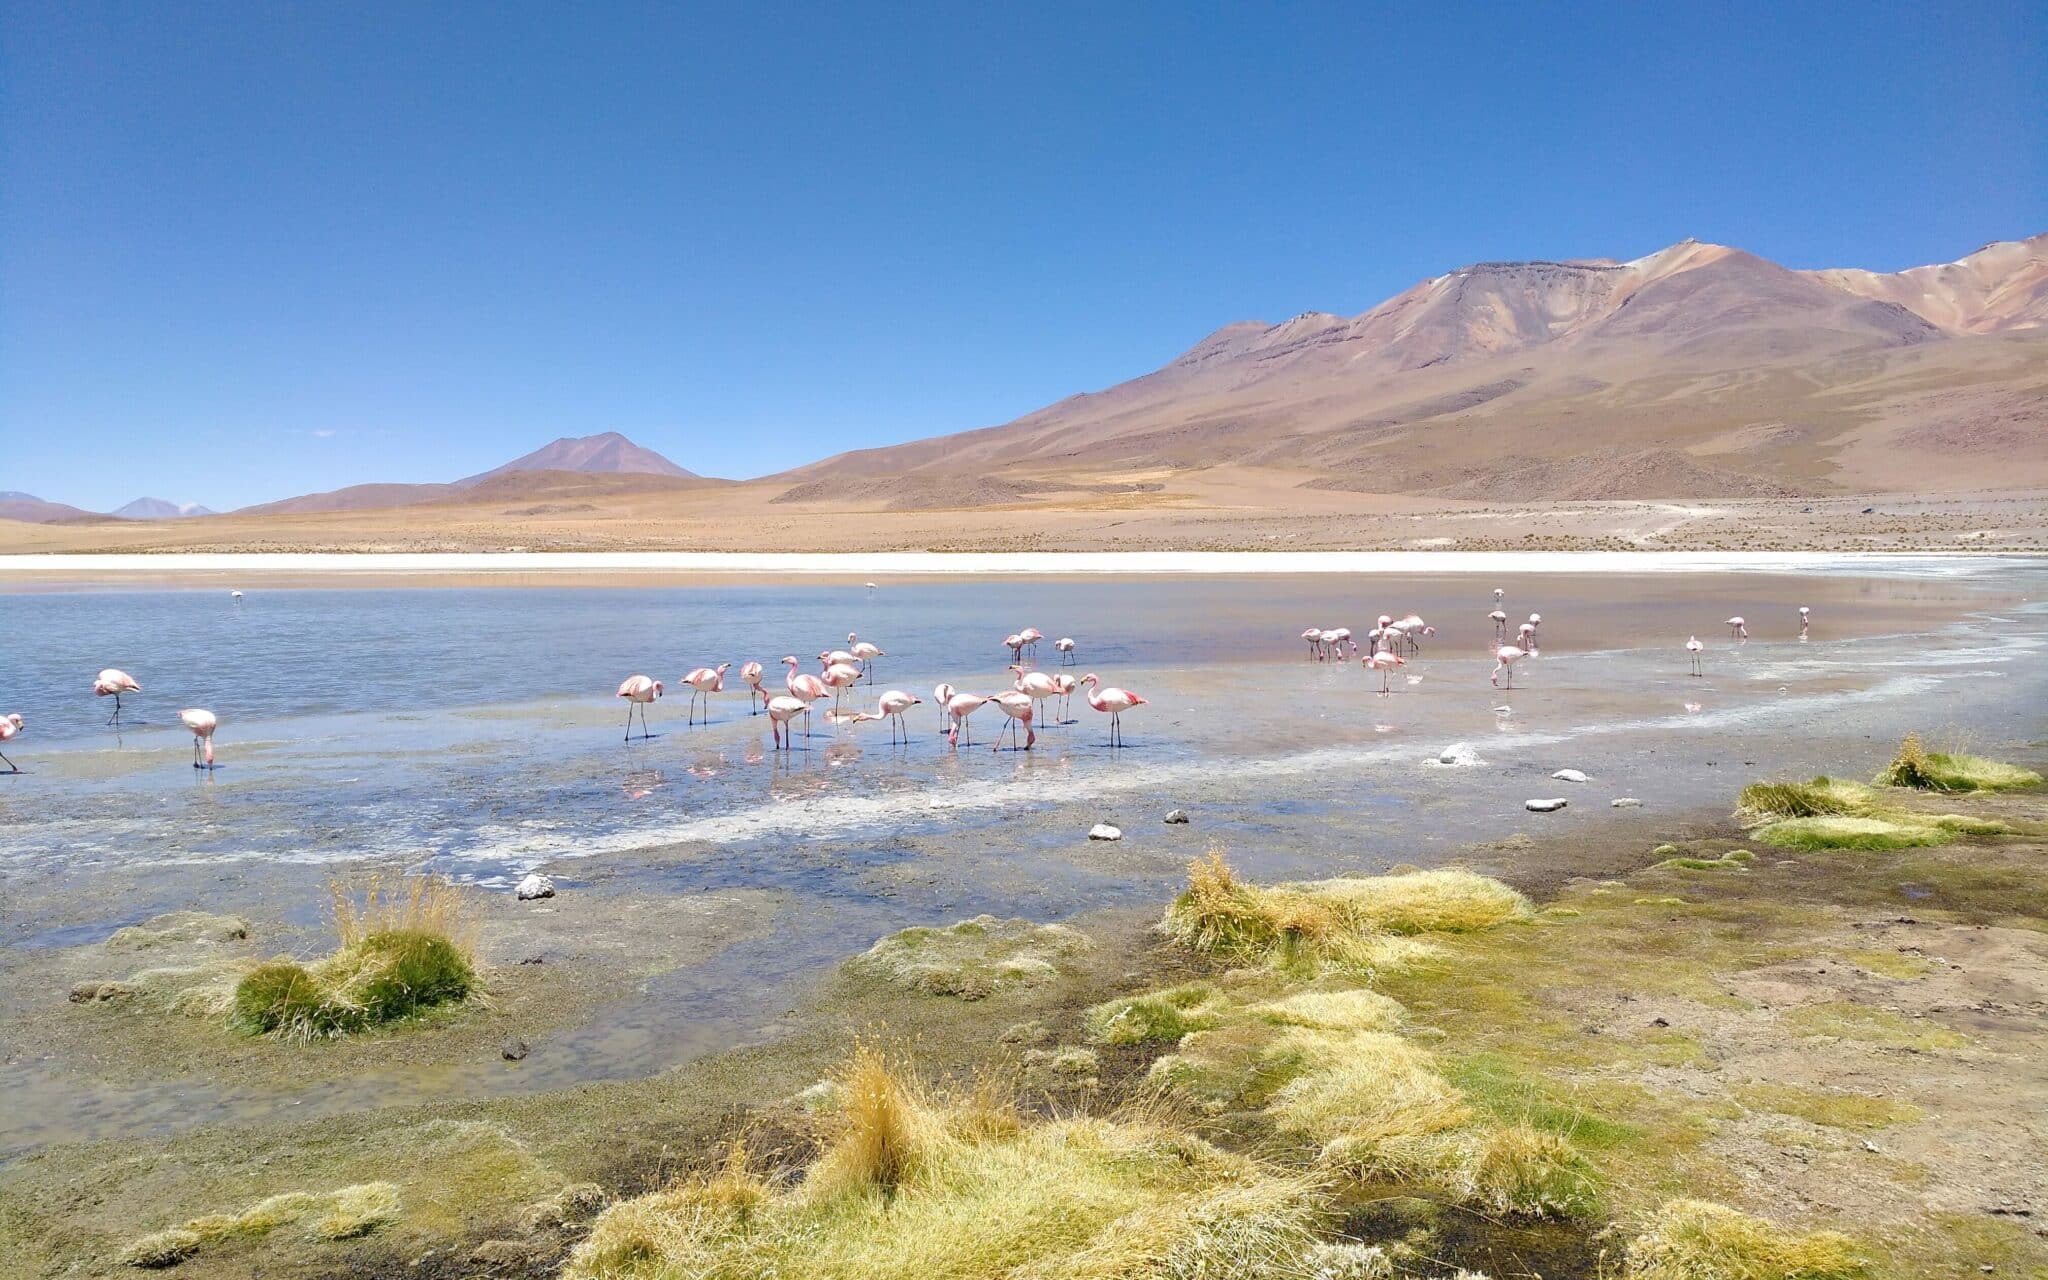 A Blue Lagoon, Through Which Flamingos Wade, In The Background A Breathtaking Mountain Landscape.